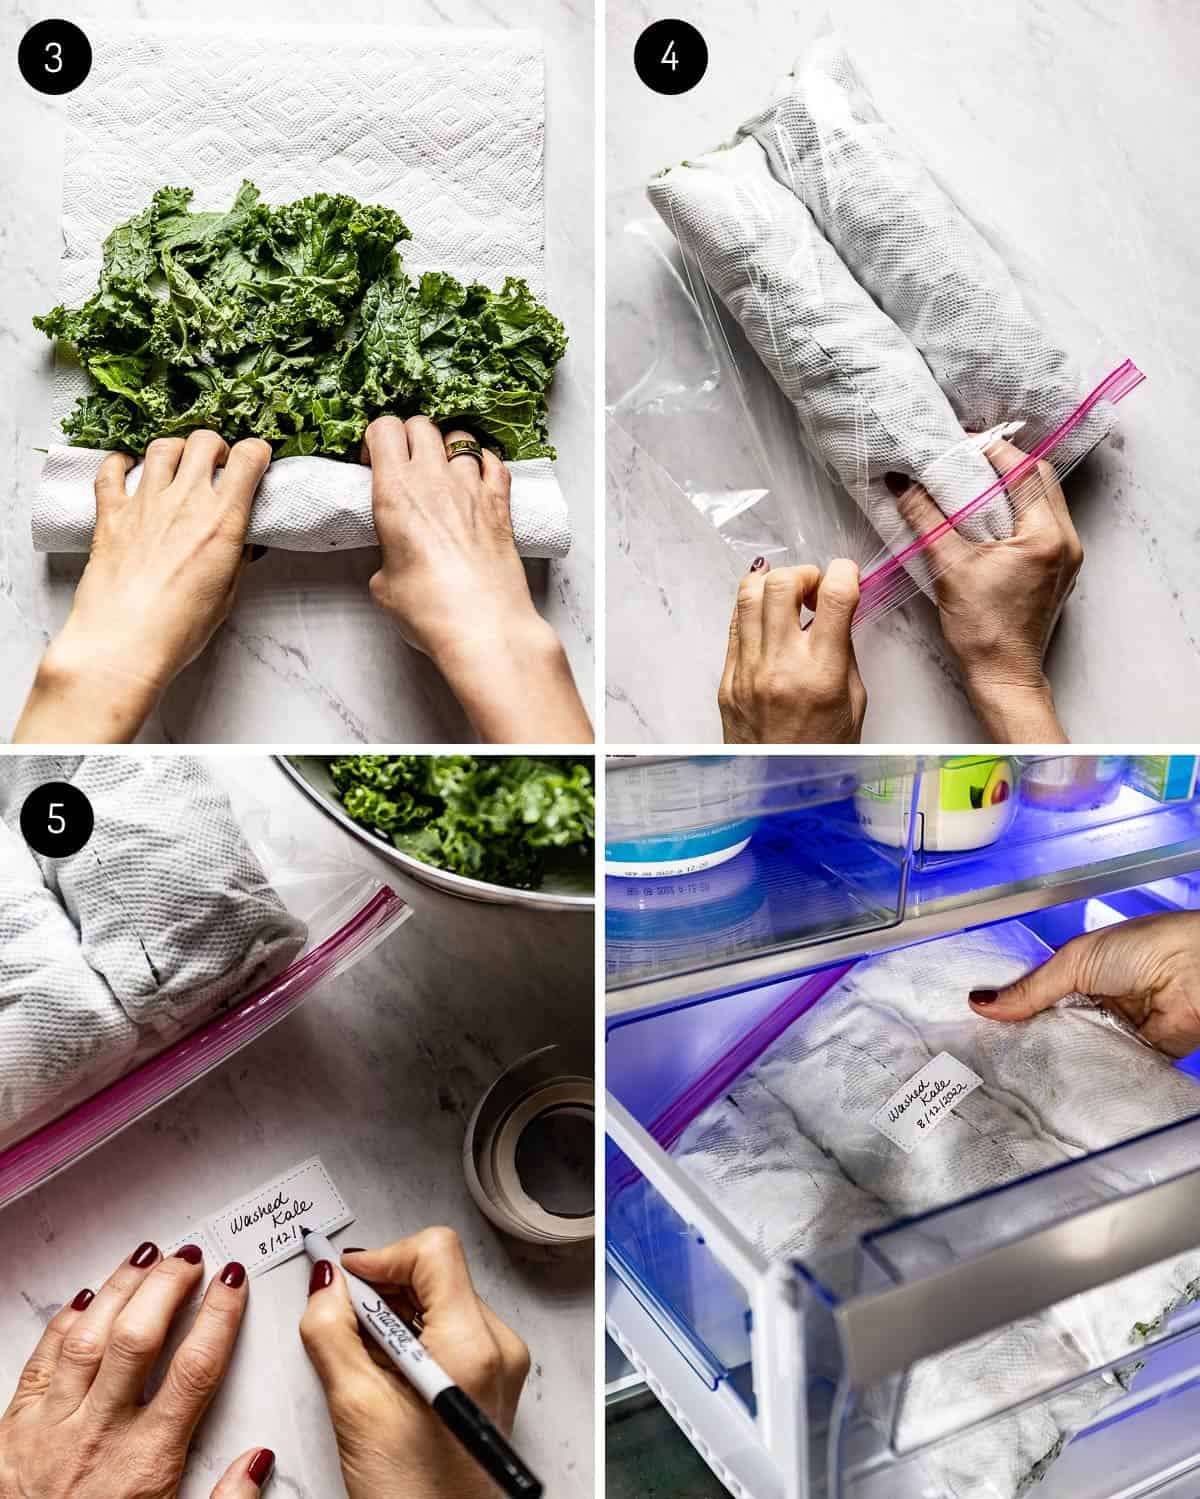 A person drying kale with a paper towel and storing in the fridge in a plastic bag. 